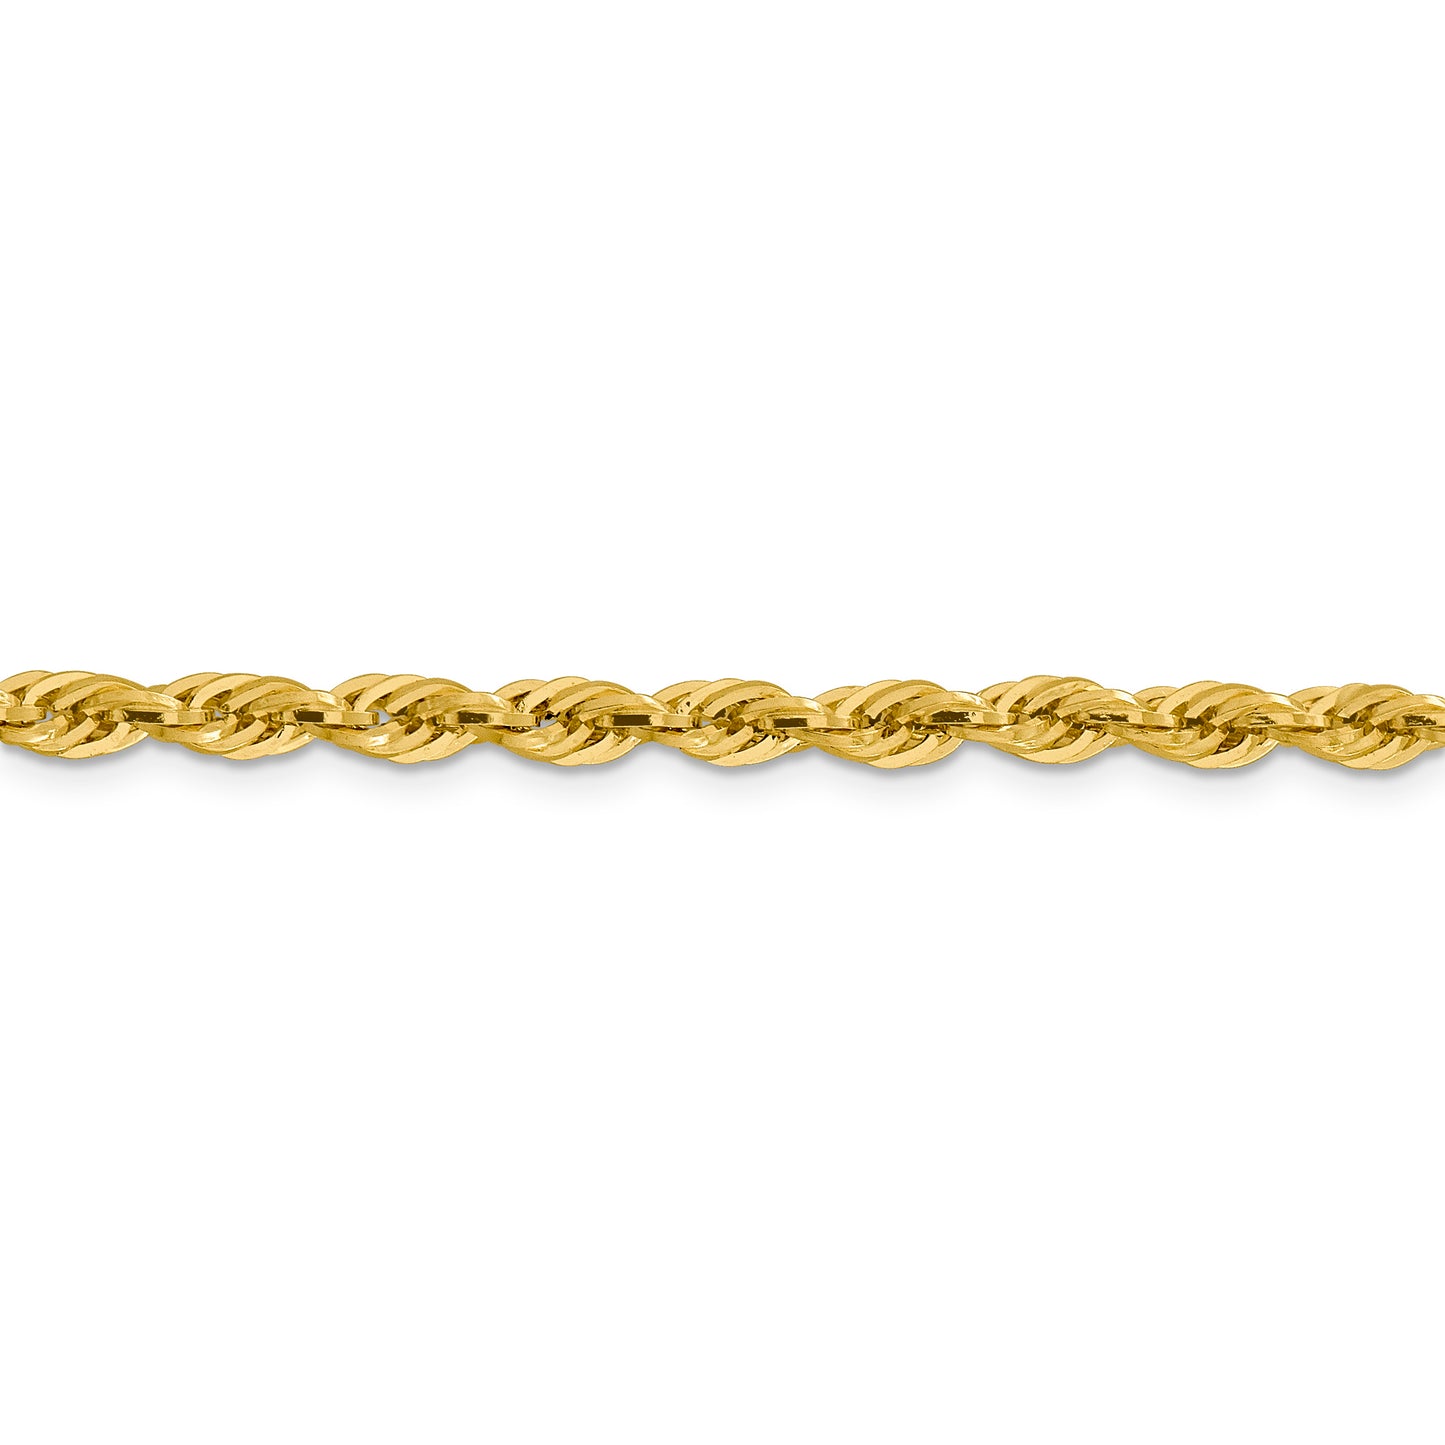 14ky 4.25mm Semi-Solid Rope Chain